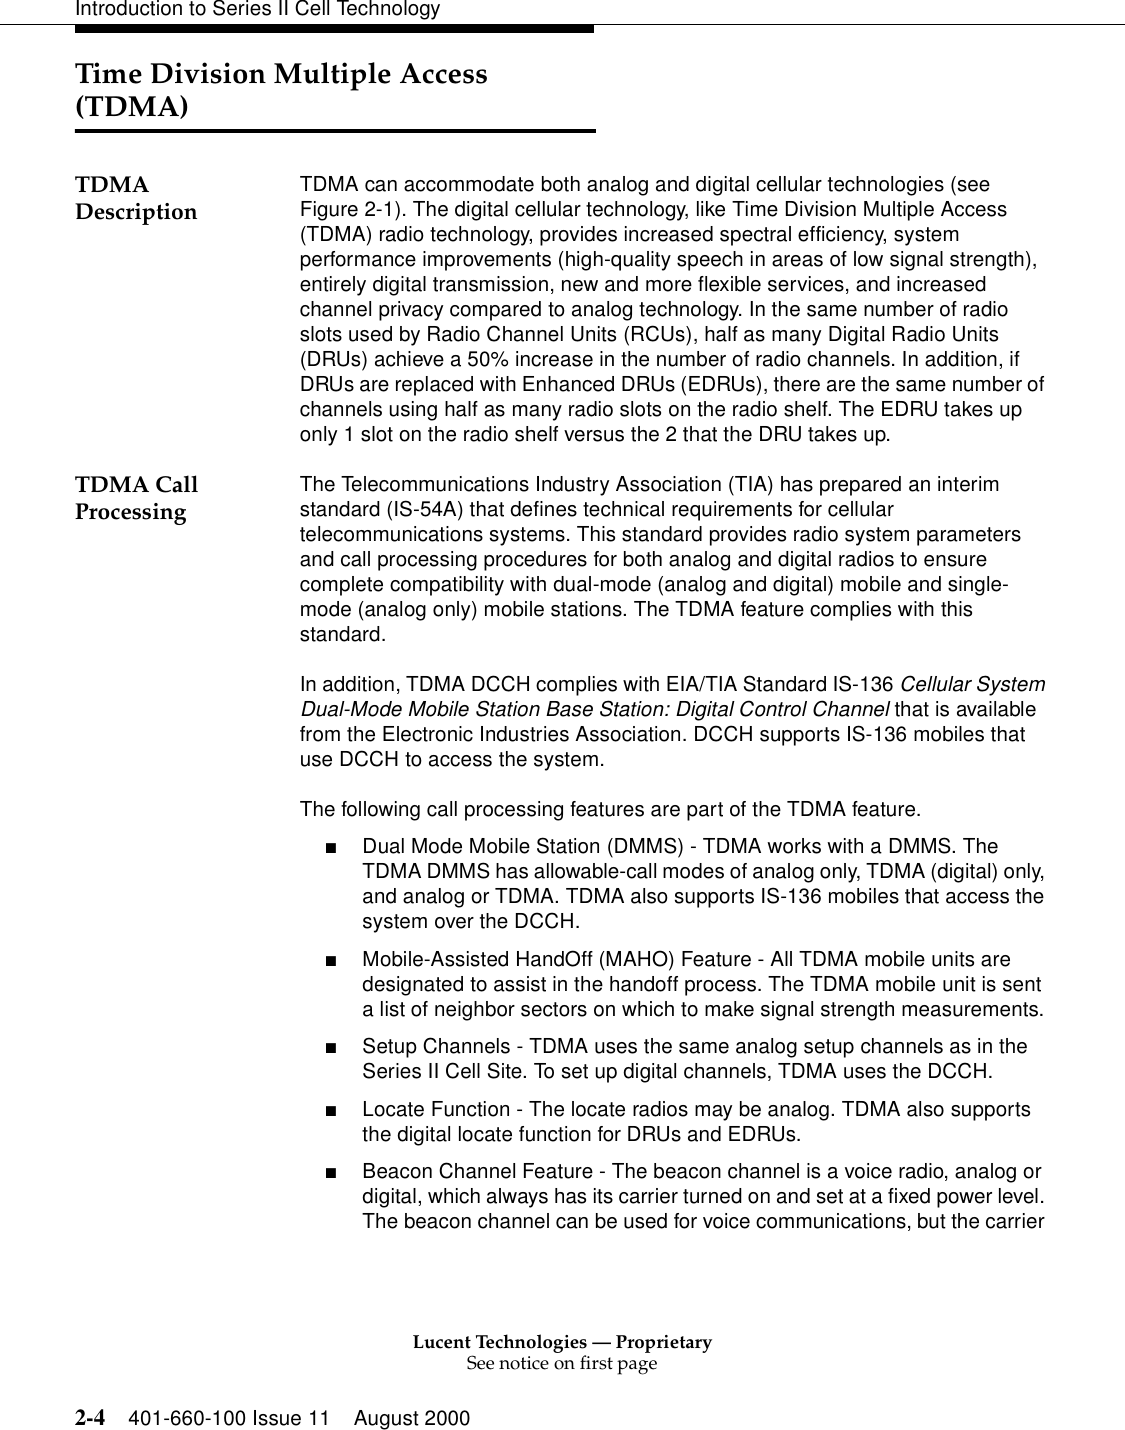 Lucent Technologies — ProprietarySee notice on first page2-4 401-660-100 Issue 11 August 2000Introduction to Series II Cell TechnologyTime Division Multiple Access (TDMA)TDMA Description TDMA can accommodate both analog and digital cellular technologies (see Figure 2-1). The digital cellular technology, like Time Division Multiple Access (TDMA) radio technology, provides increased spectral efficiency, system performance improvements (high-quality speech in areas of low signal strength), entirely digital transmission, new and more flexible services, and increased channel privacy compared to analog technology. In the same number of radio slots used by Radio Channel Units (RCUs), half as many Digital Radio Units (DRUs) achieve a 50% increase in the number of radio channels. In addition, if DRUs are replaced with Enhanced DRUs (EDRUs), there are the same number of channels using half as many radio slots on the radio shelf. The EDRU takes up only 1 slot on the radio shelf versus the 2 that the DRU takes up.TDMA Call Processing  The Telecommunications Industry Association (TIA) has prepared an interim standard (IS-54A) that defines technical requirements for cellular telecommunications systems. This standard provides radio system parameters and call processing procedures for both analog and digital radios to ensure complete compatibility with dual-mode (analog and digital) mobile and single-mode (analog only) mobile stations. The TDMA feature complies with this standard. In addition, TDMA DCCH complies with EIA/TIA Standard IS-136 Cellular System Dual-Mode Mobile Station Base Station: Digital Control Channel that is available from the Electronic Industries Association. DCCH supports IS-136 mobiles that use DCCH to access the system. The following call processing features are part of the TDMA feature. ■Dual Mode Mobile Station (DMMS) - TDMA works with a DMMS. The TDMA DMMS has allowable-call modes of analog only, TDMA (digital) only, and analog or TDMA. TDMA also supports IS-136 mobiles that access the system over the DCCH. ■Mobile-Assisted HandOff (MAHO) Feature - All TDMA mobile units are designated to assist in the handoff process. The TDMA mobile unit is sent a list of neighbor sectors on which to make signal strength measurements. ■Setup Channels - TDMA uses the same analog setup channels as in the Series II Cell Site. To set up digital channels, TDMA uses the DCCH. ■Locate Function - The locate radios may be analog. TDMA also supports the digital locate function for DRUs and EDRUs. ■Beacon Channel Feature - The beacon channel is a voice radio, analog or digital, which always has its carrier turned on and set at a fixed power level. The beacon channel can be used for voice communications, but the carrier 